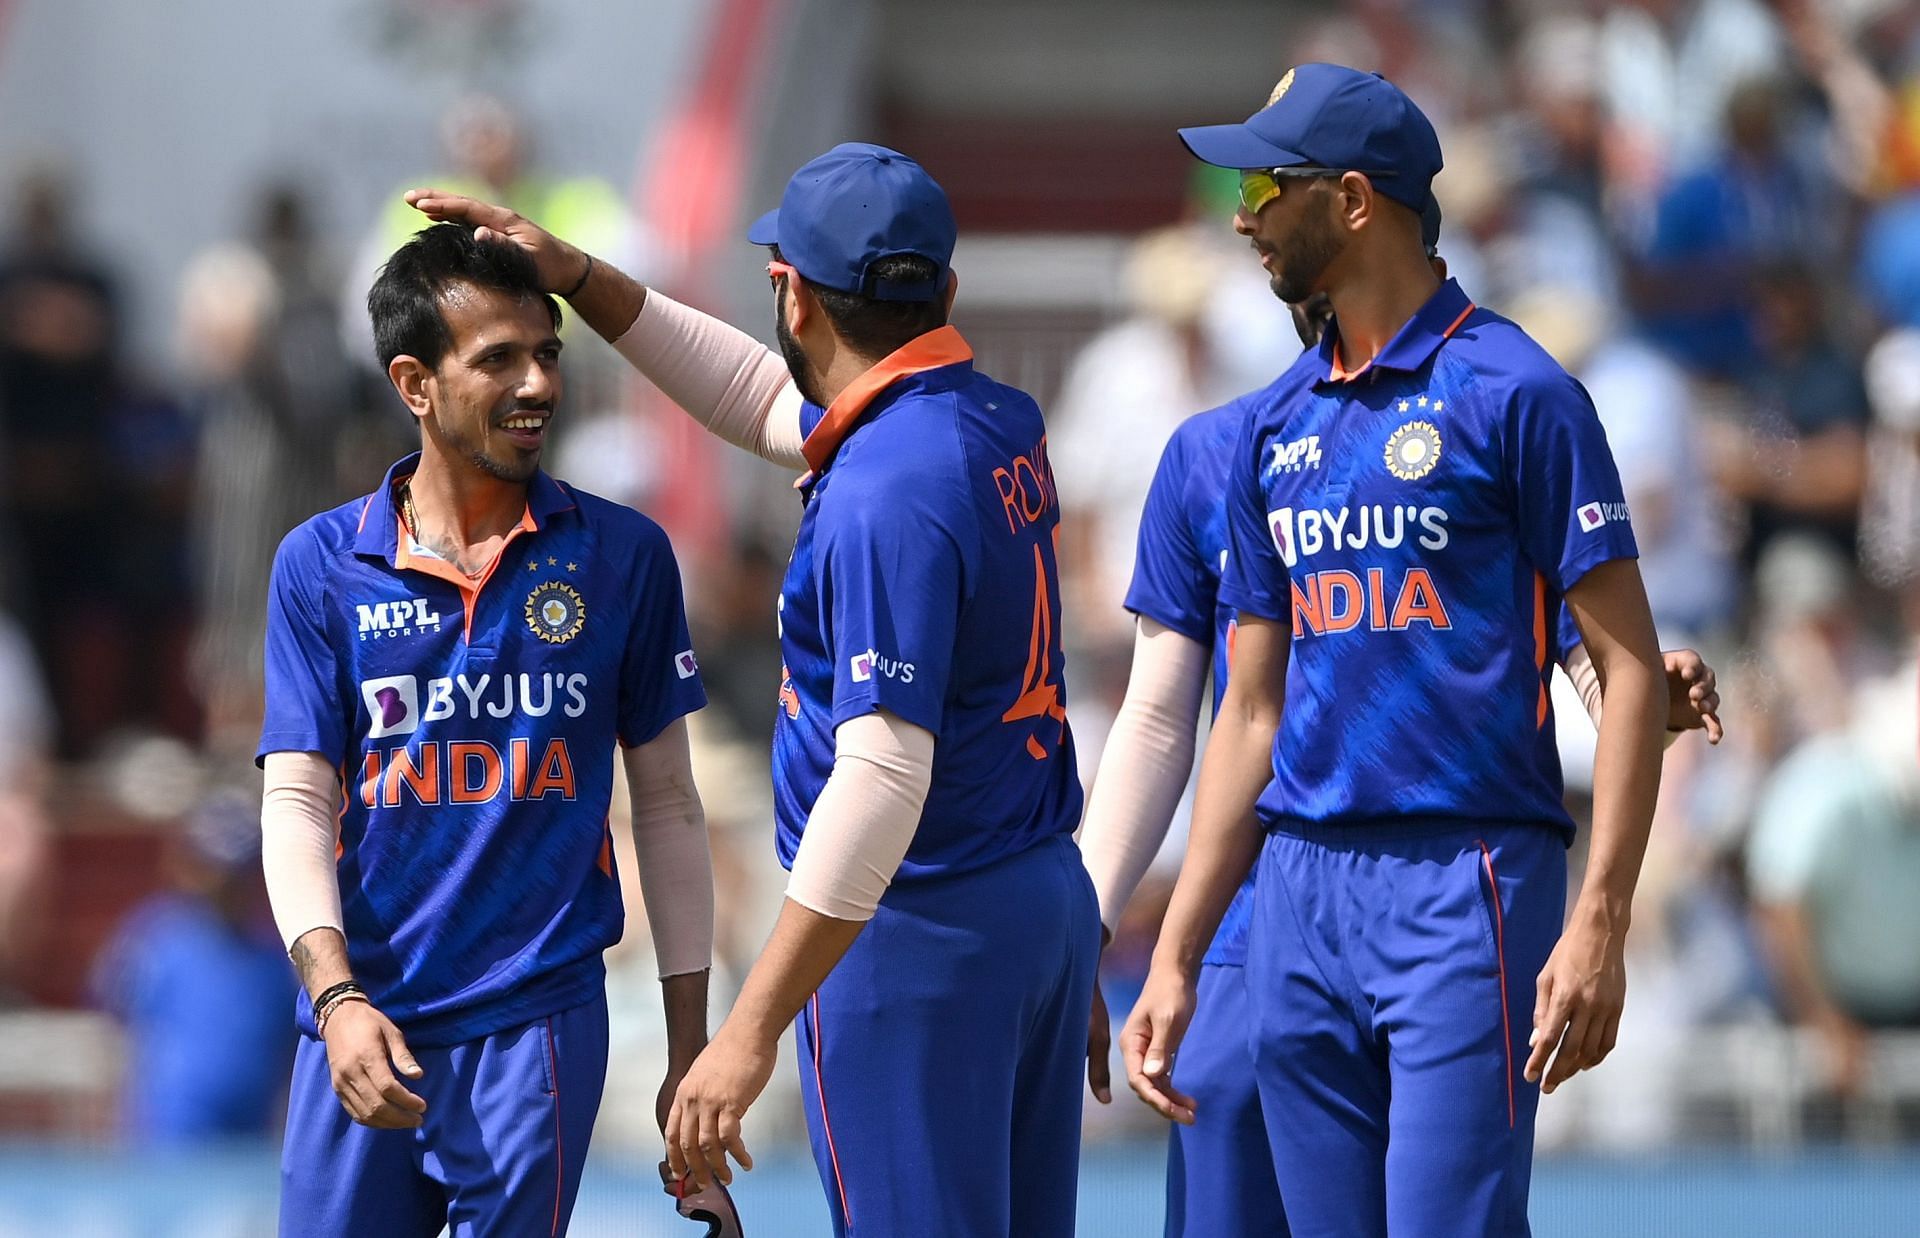 Team India leg-spinner Yuzvendra Chahal (left) celebrates a wicket. Pic: Getty Images